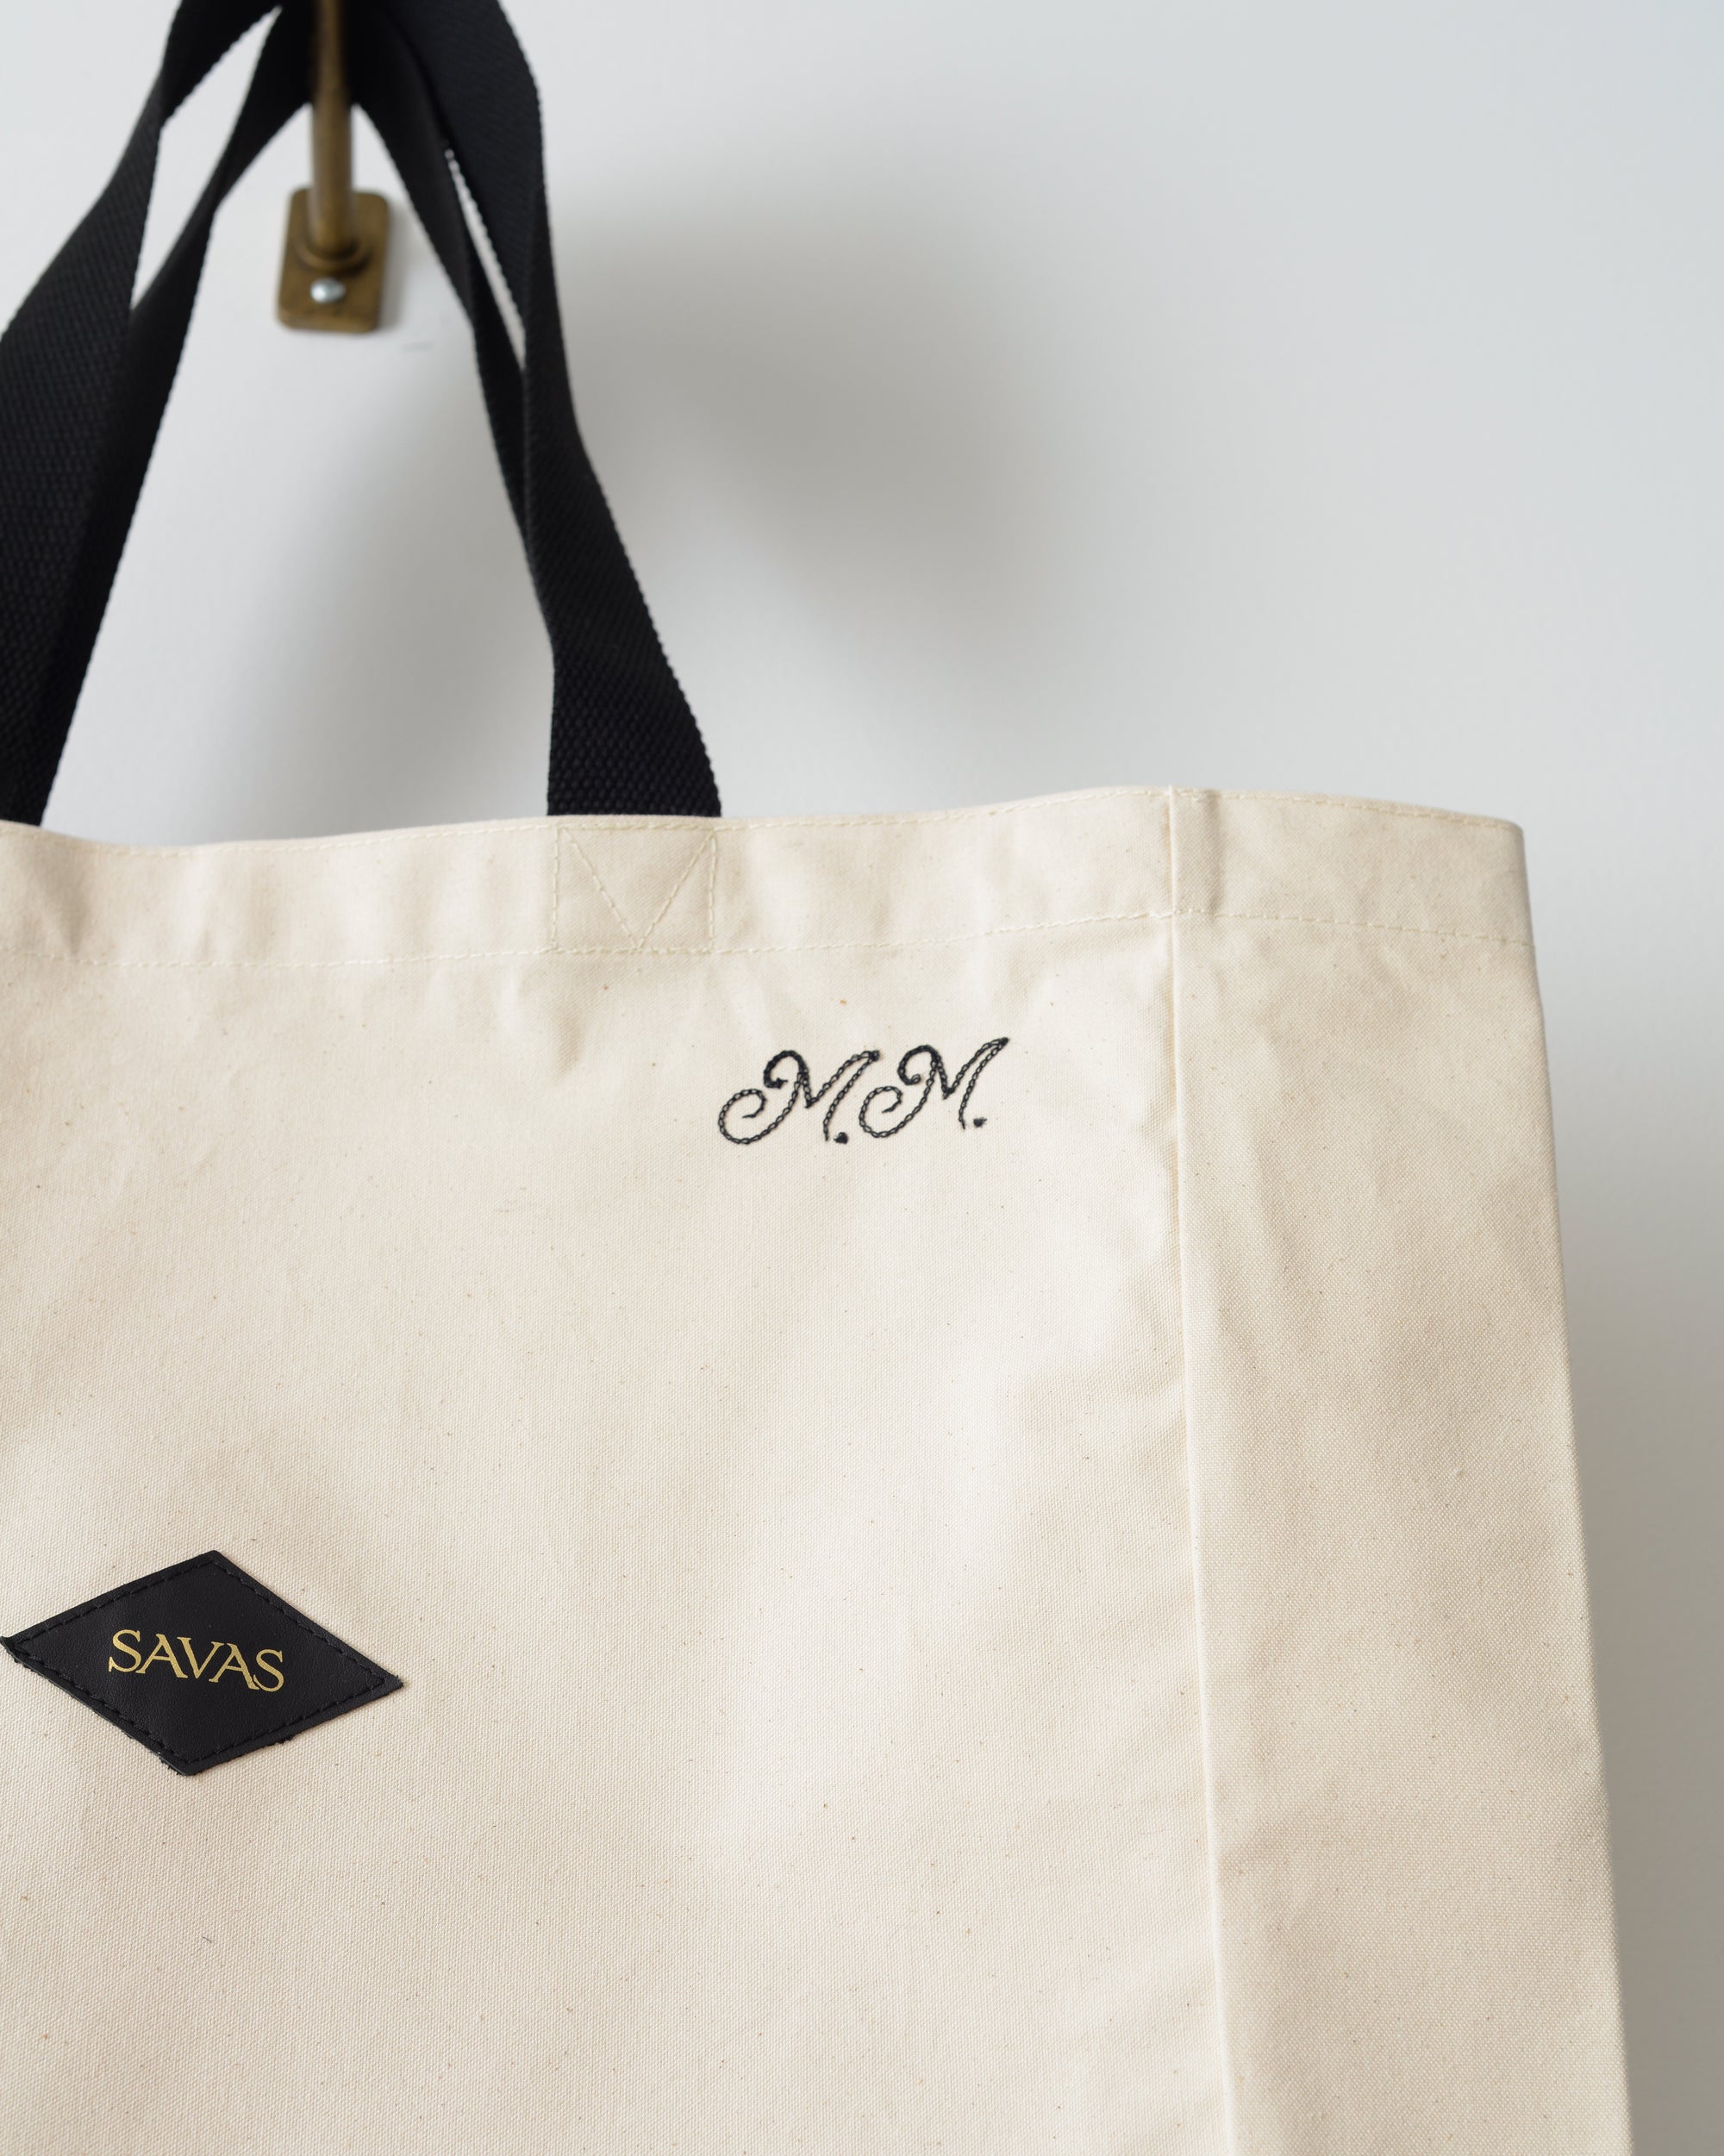 The Great Tote